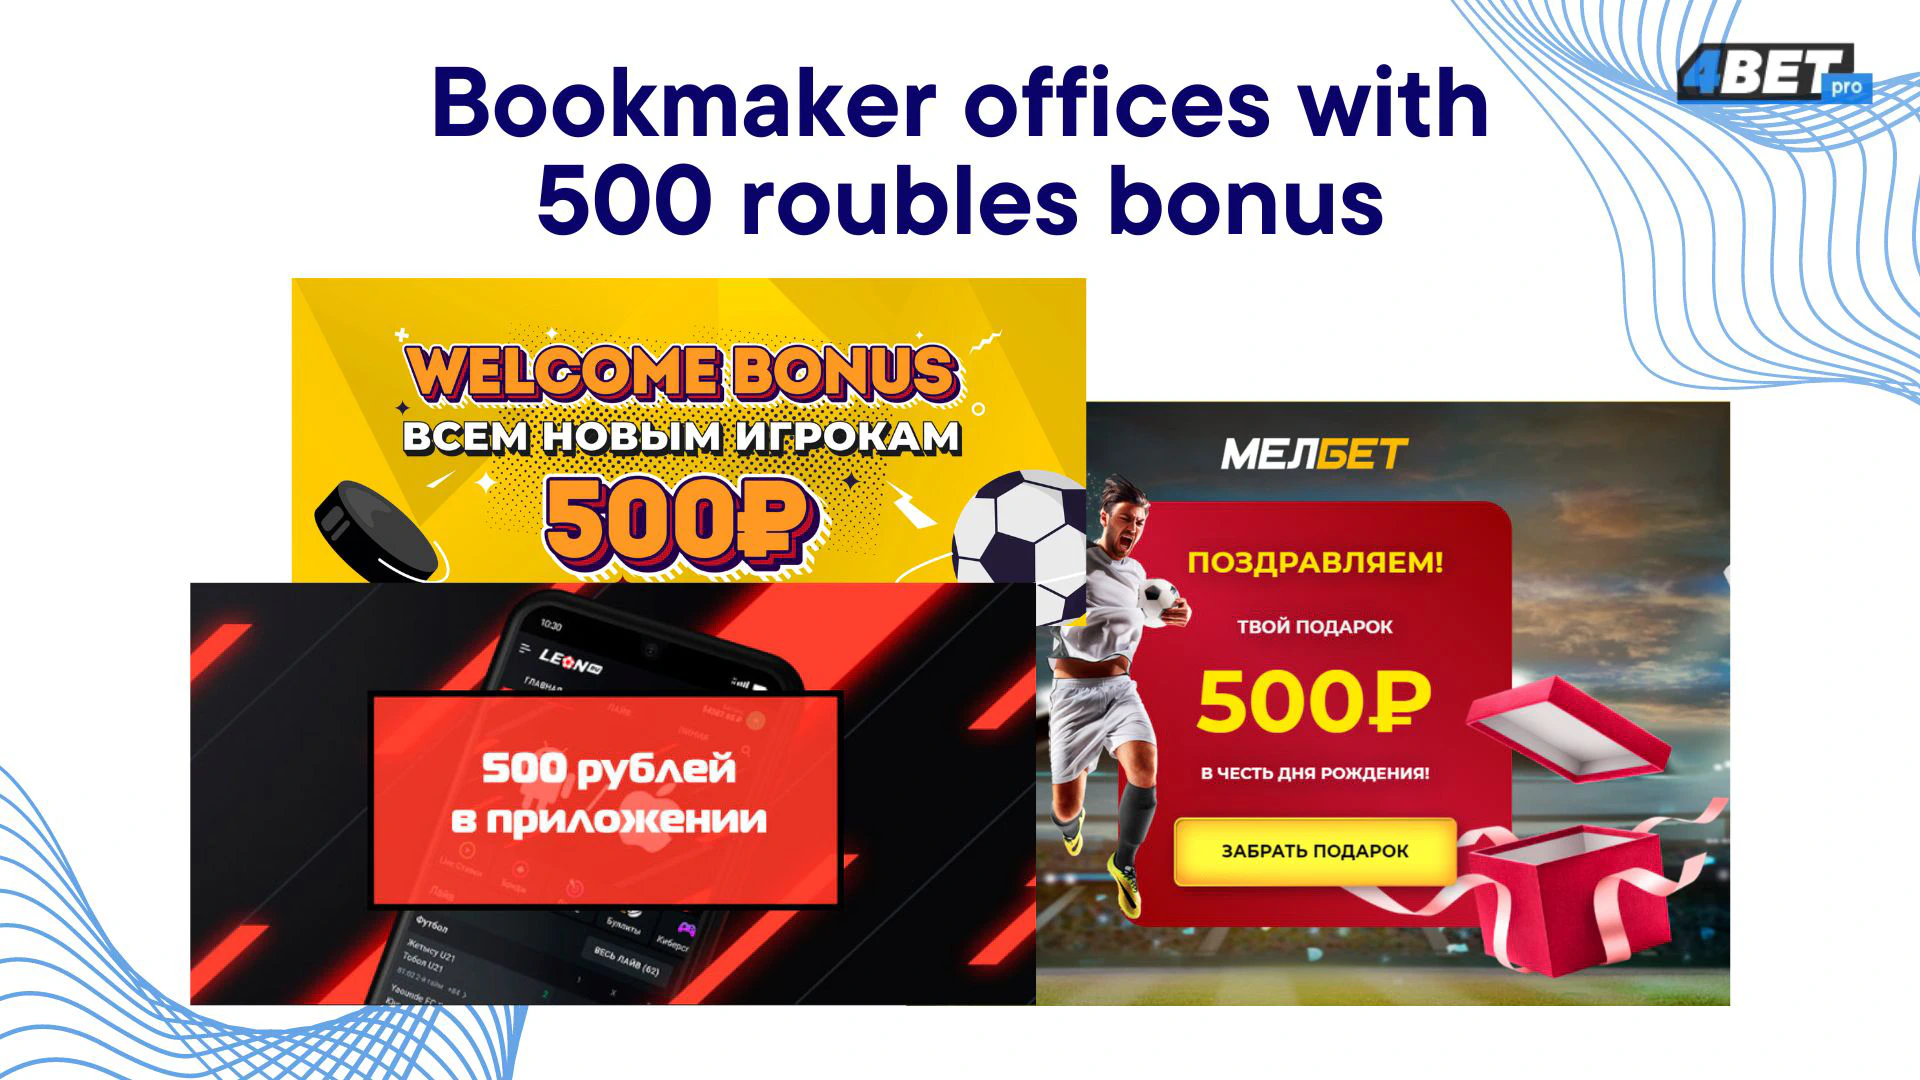 500 rubles as a gift for registration